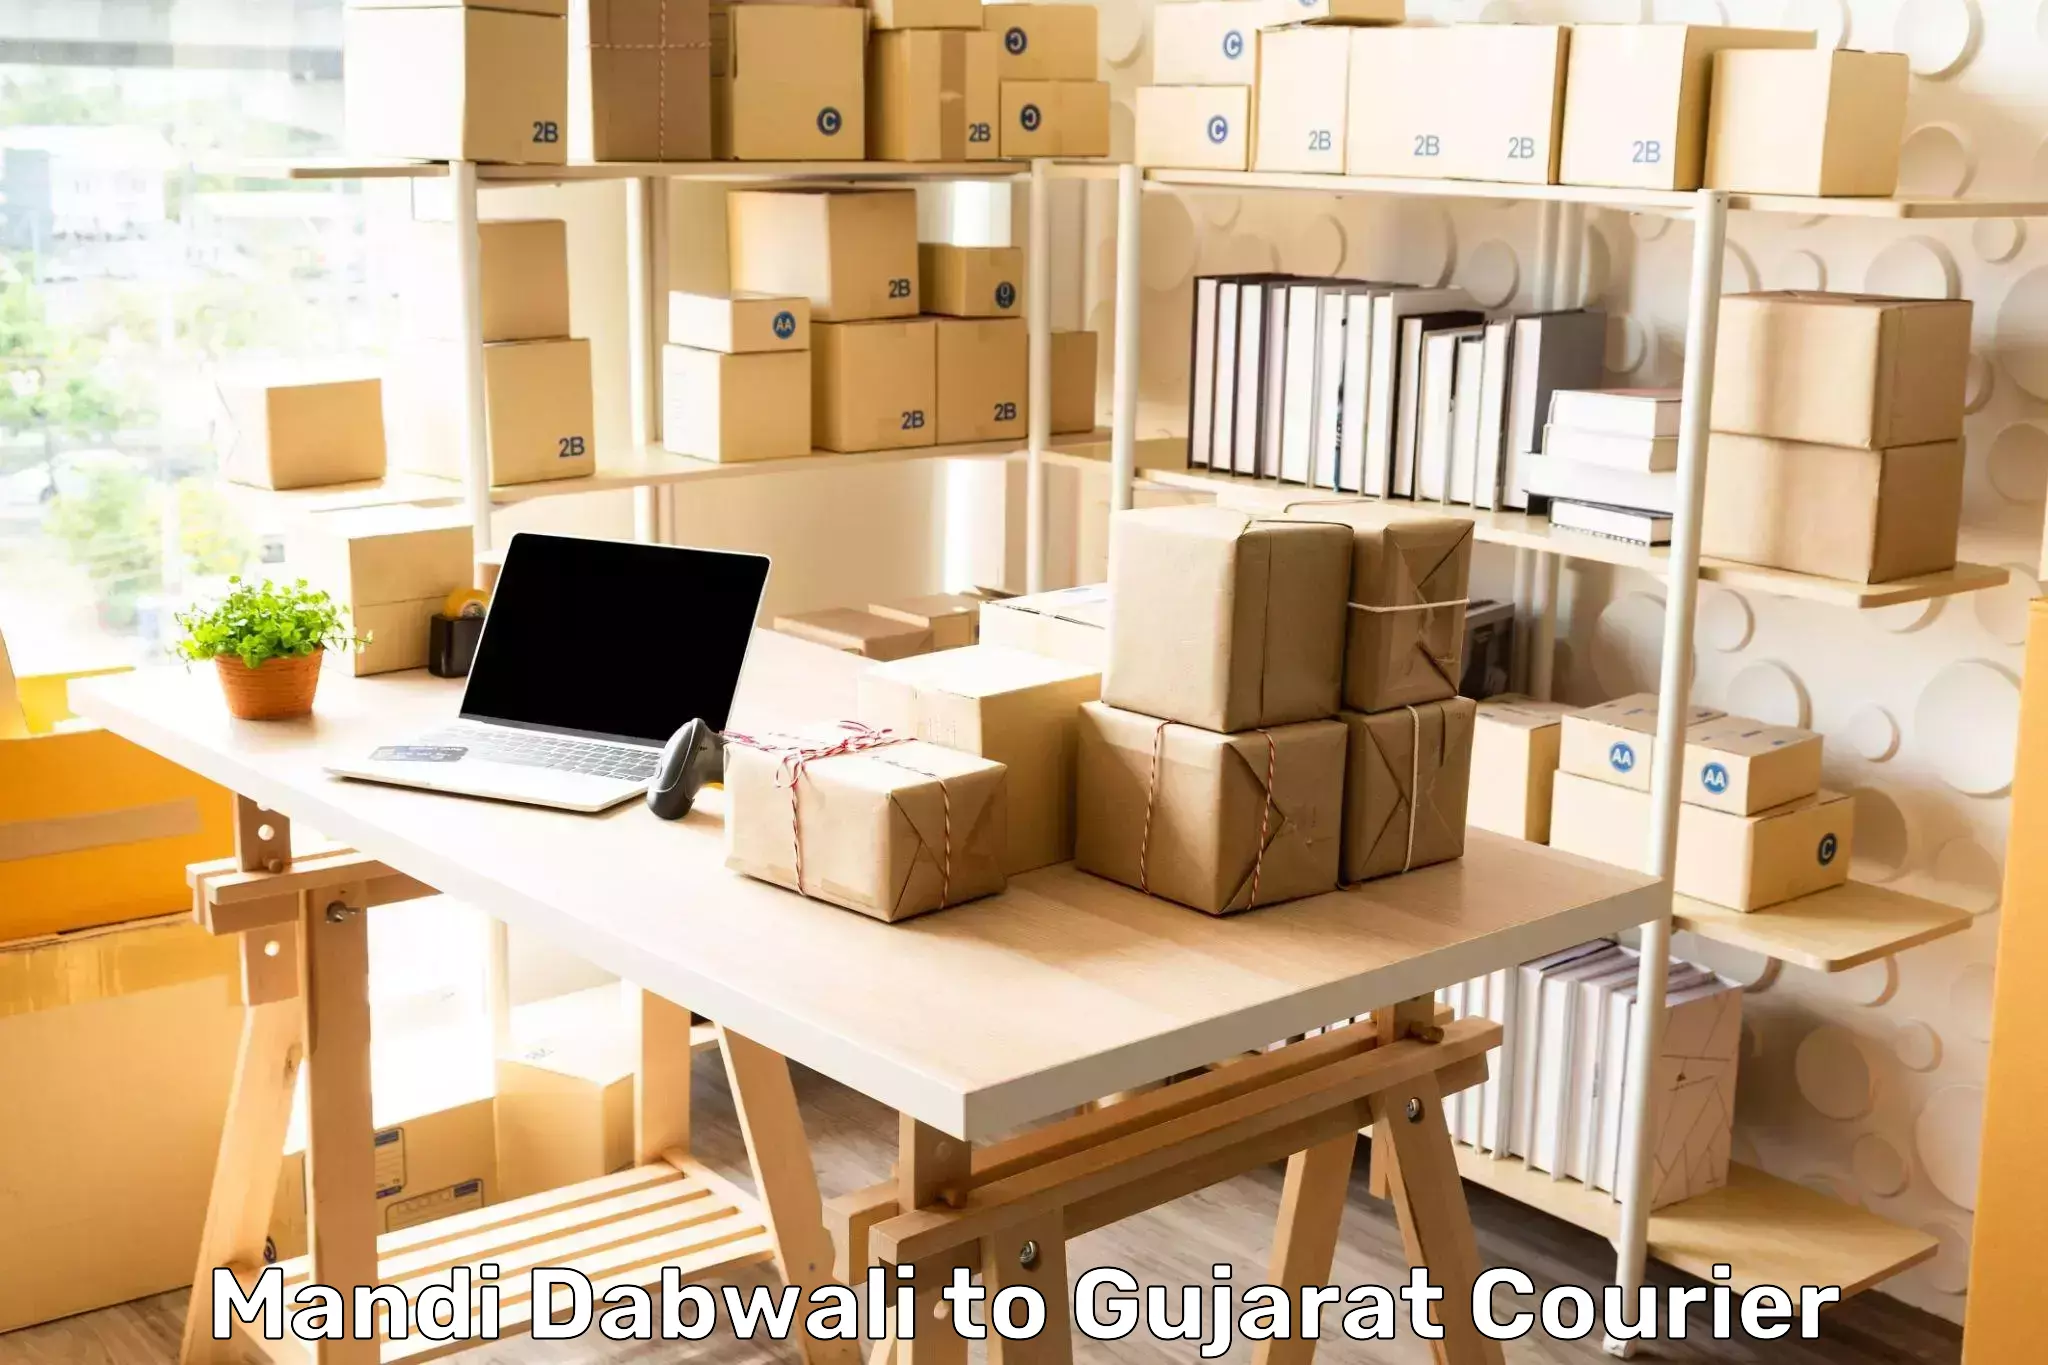 Business delivery service Mandi Dabwali to NIT Surat